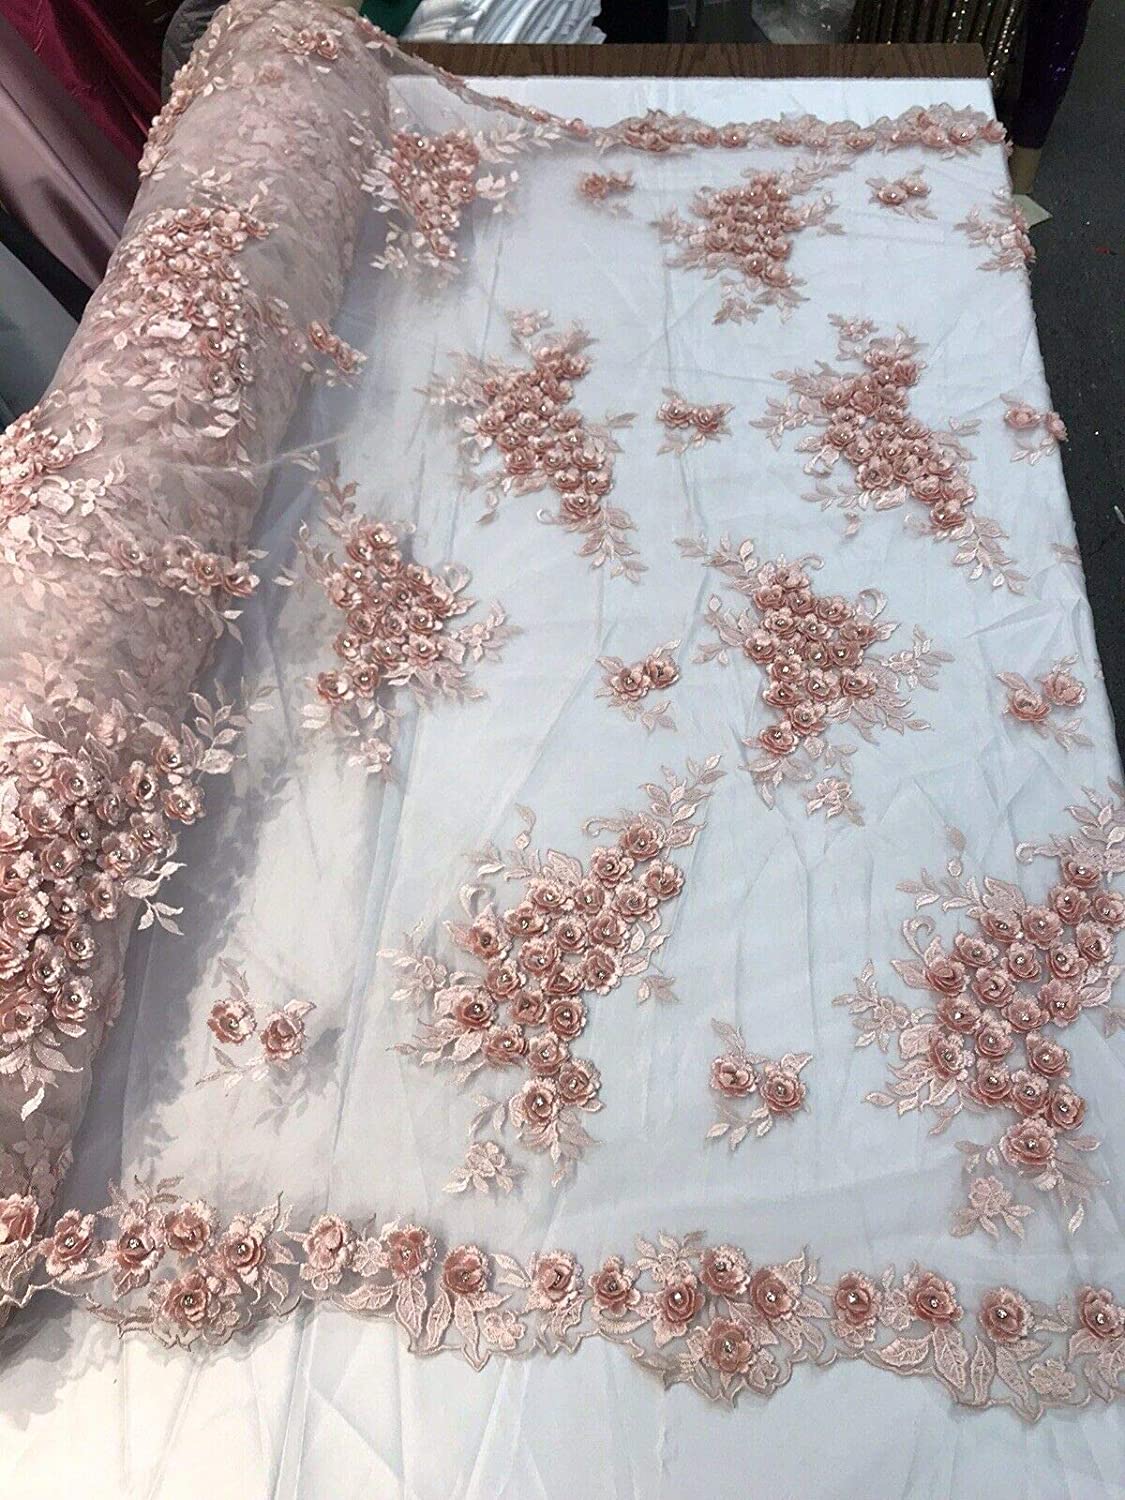 BLUSH PINK 3D FLORAL DESIGN EMBROIDERY AND BEADED WITH RHINESTONES ON MESH LACE